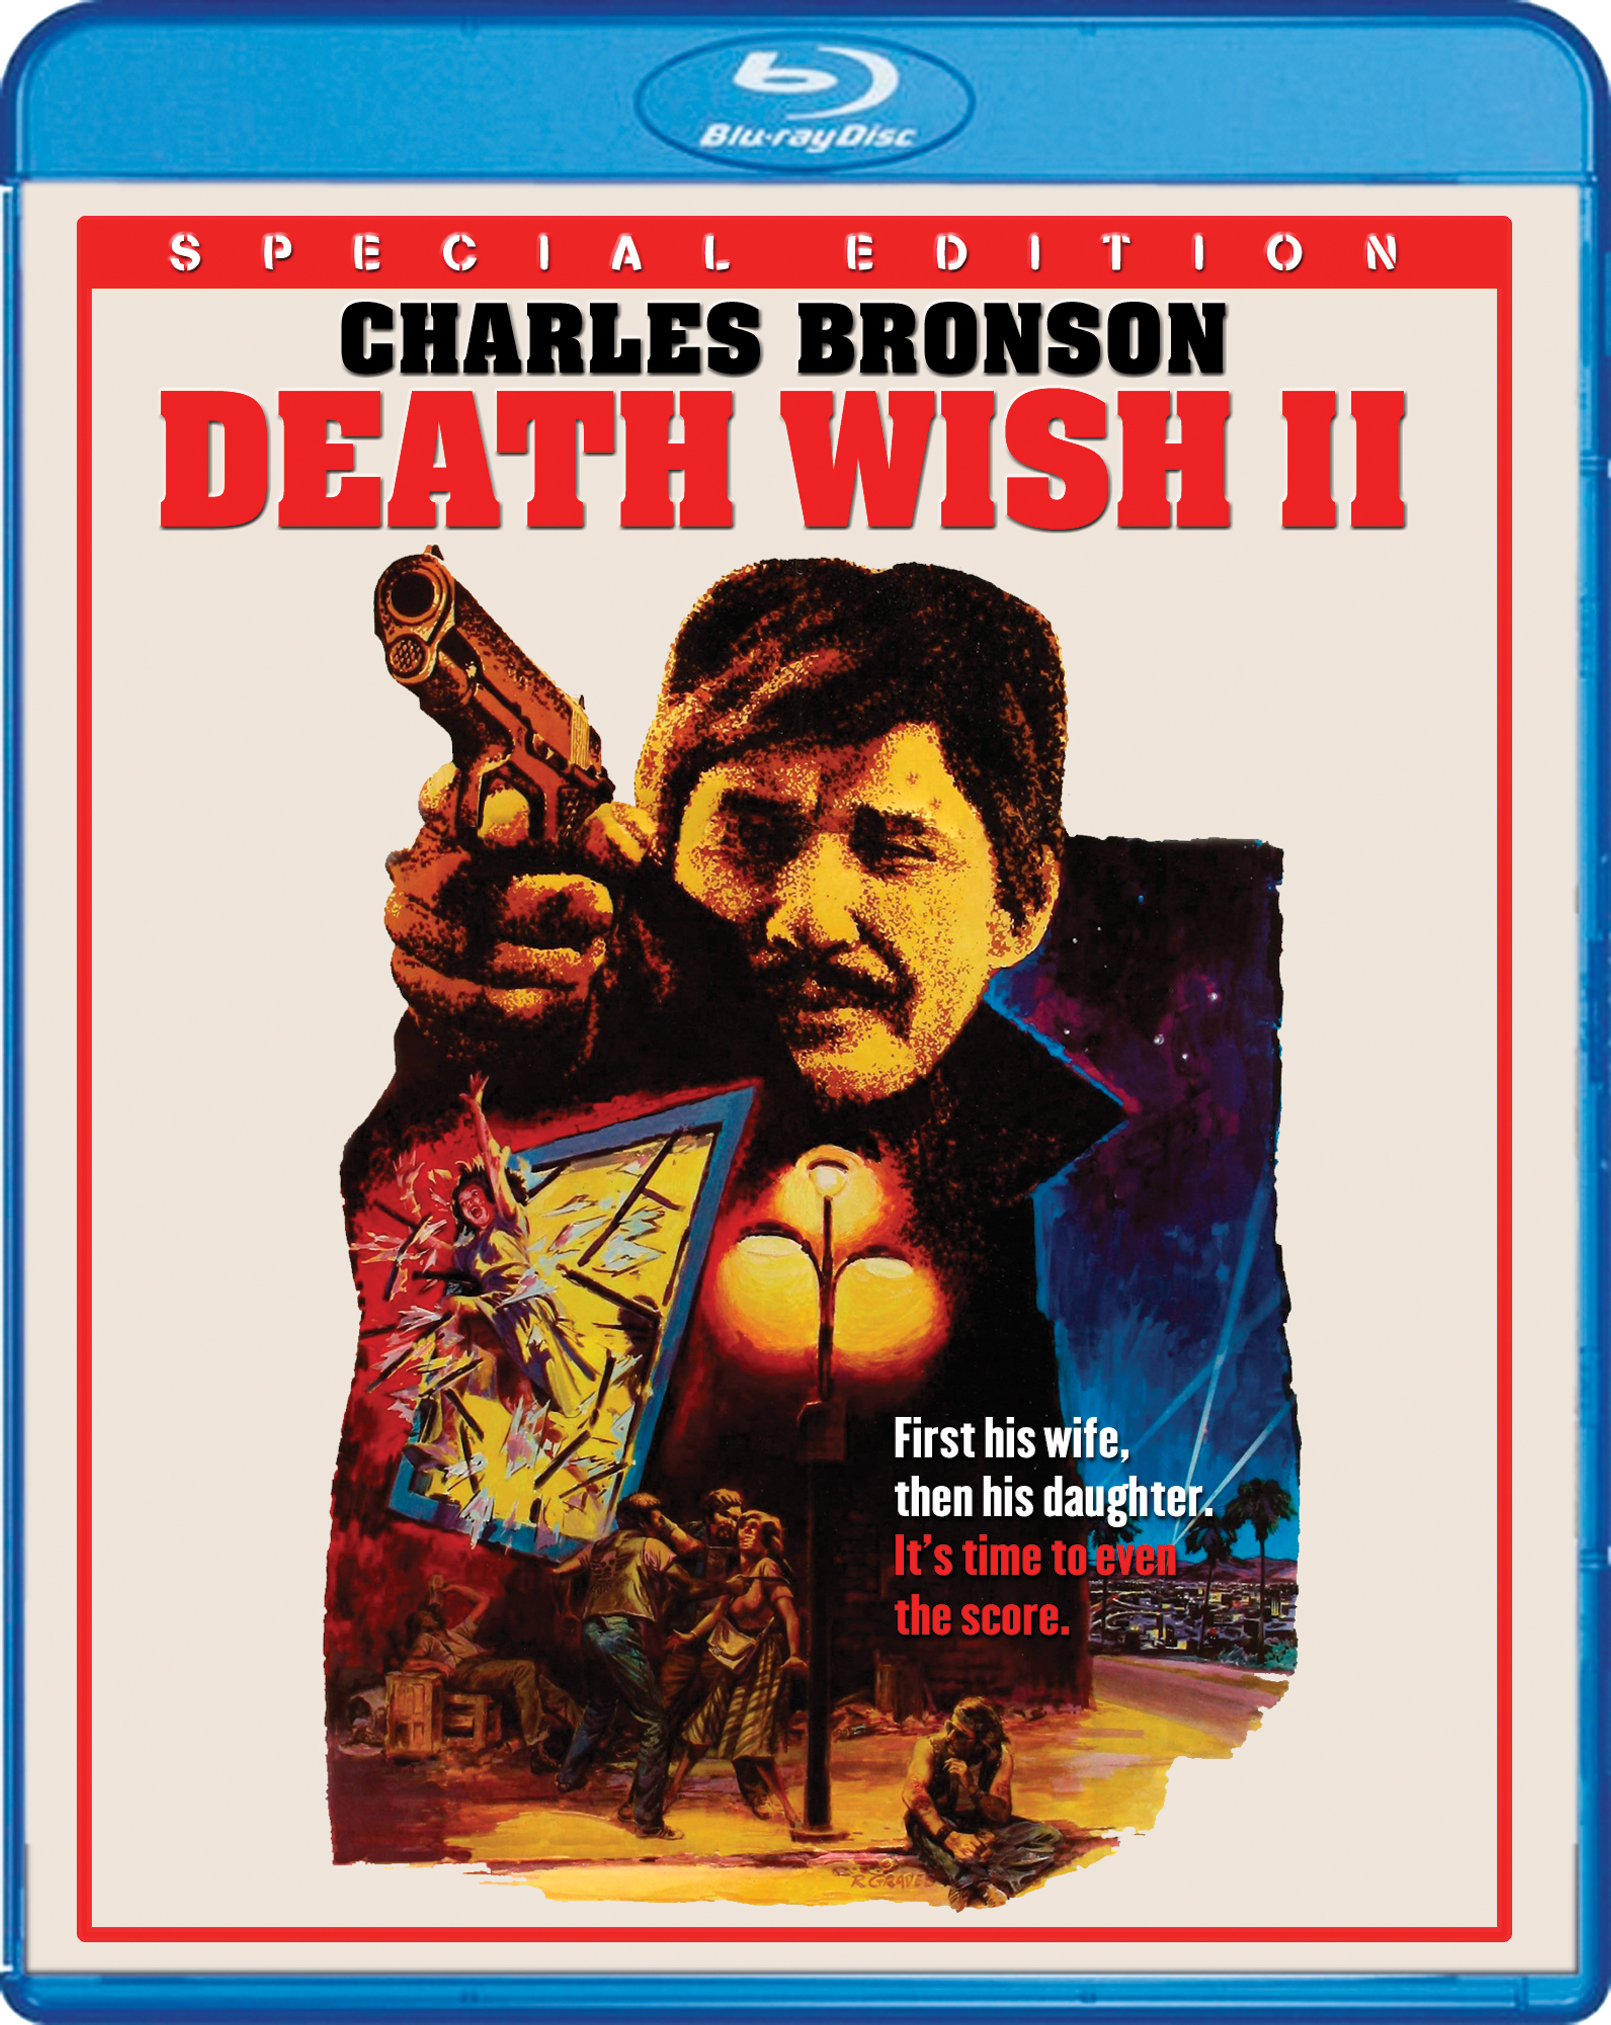 Death wish 2 unrated version